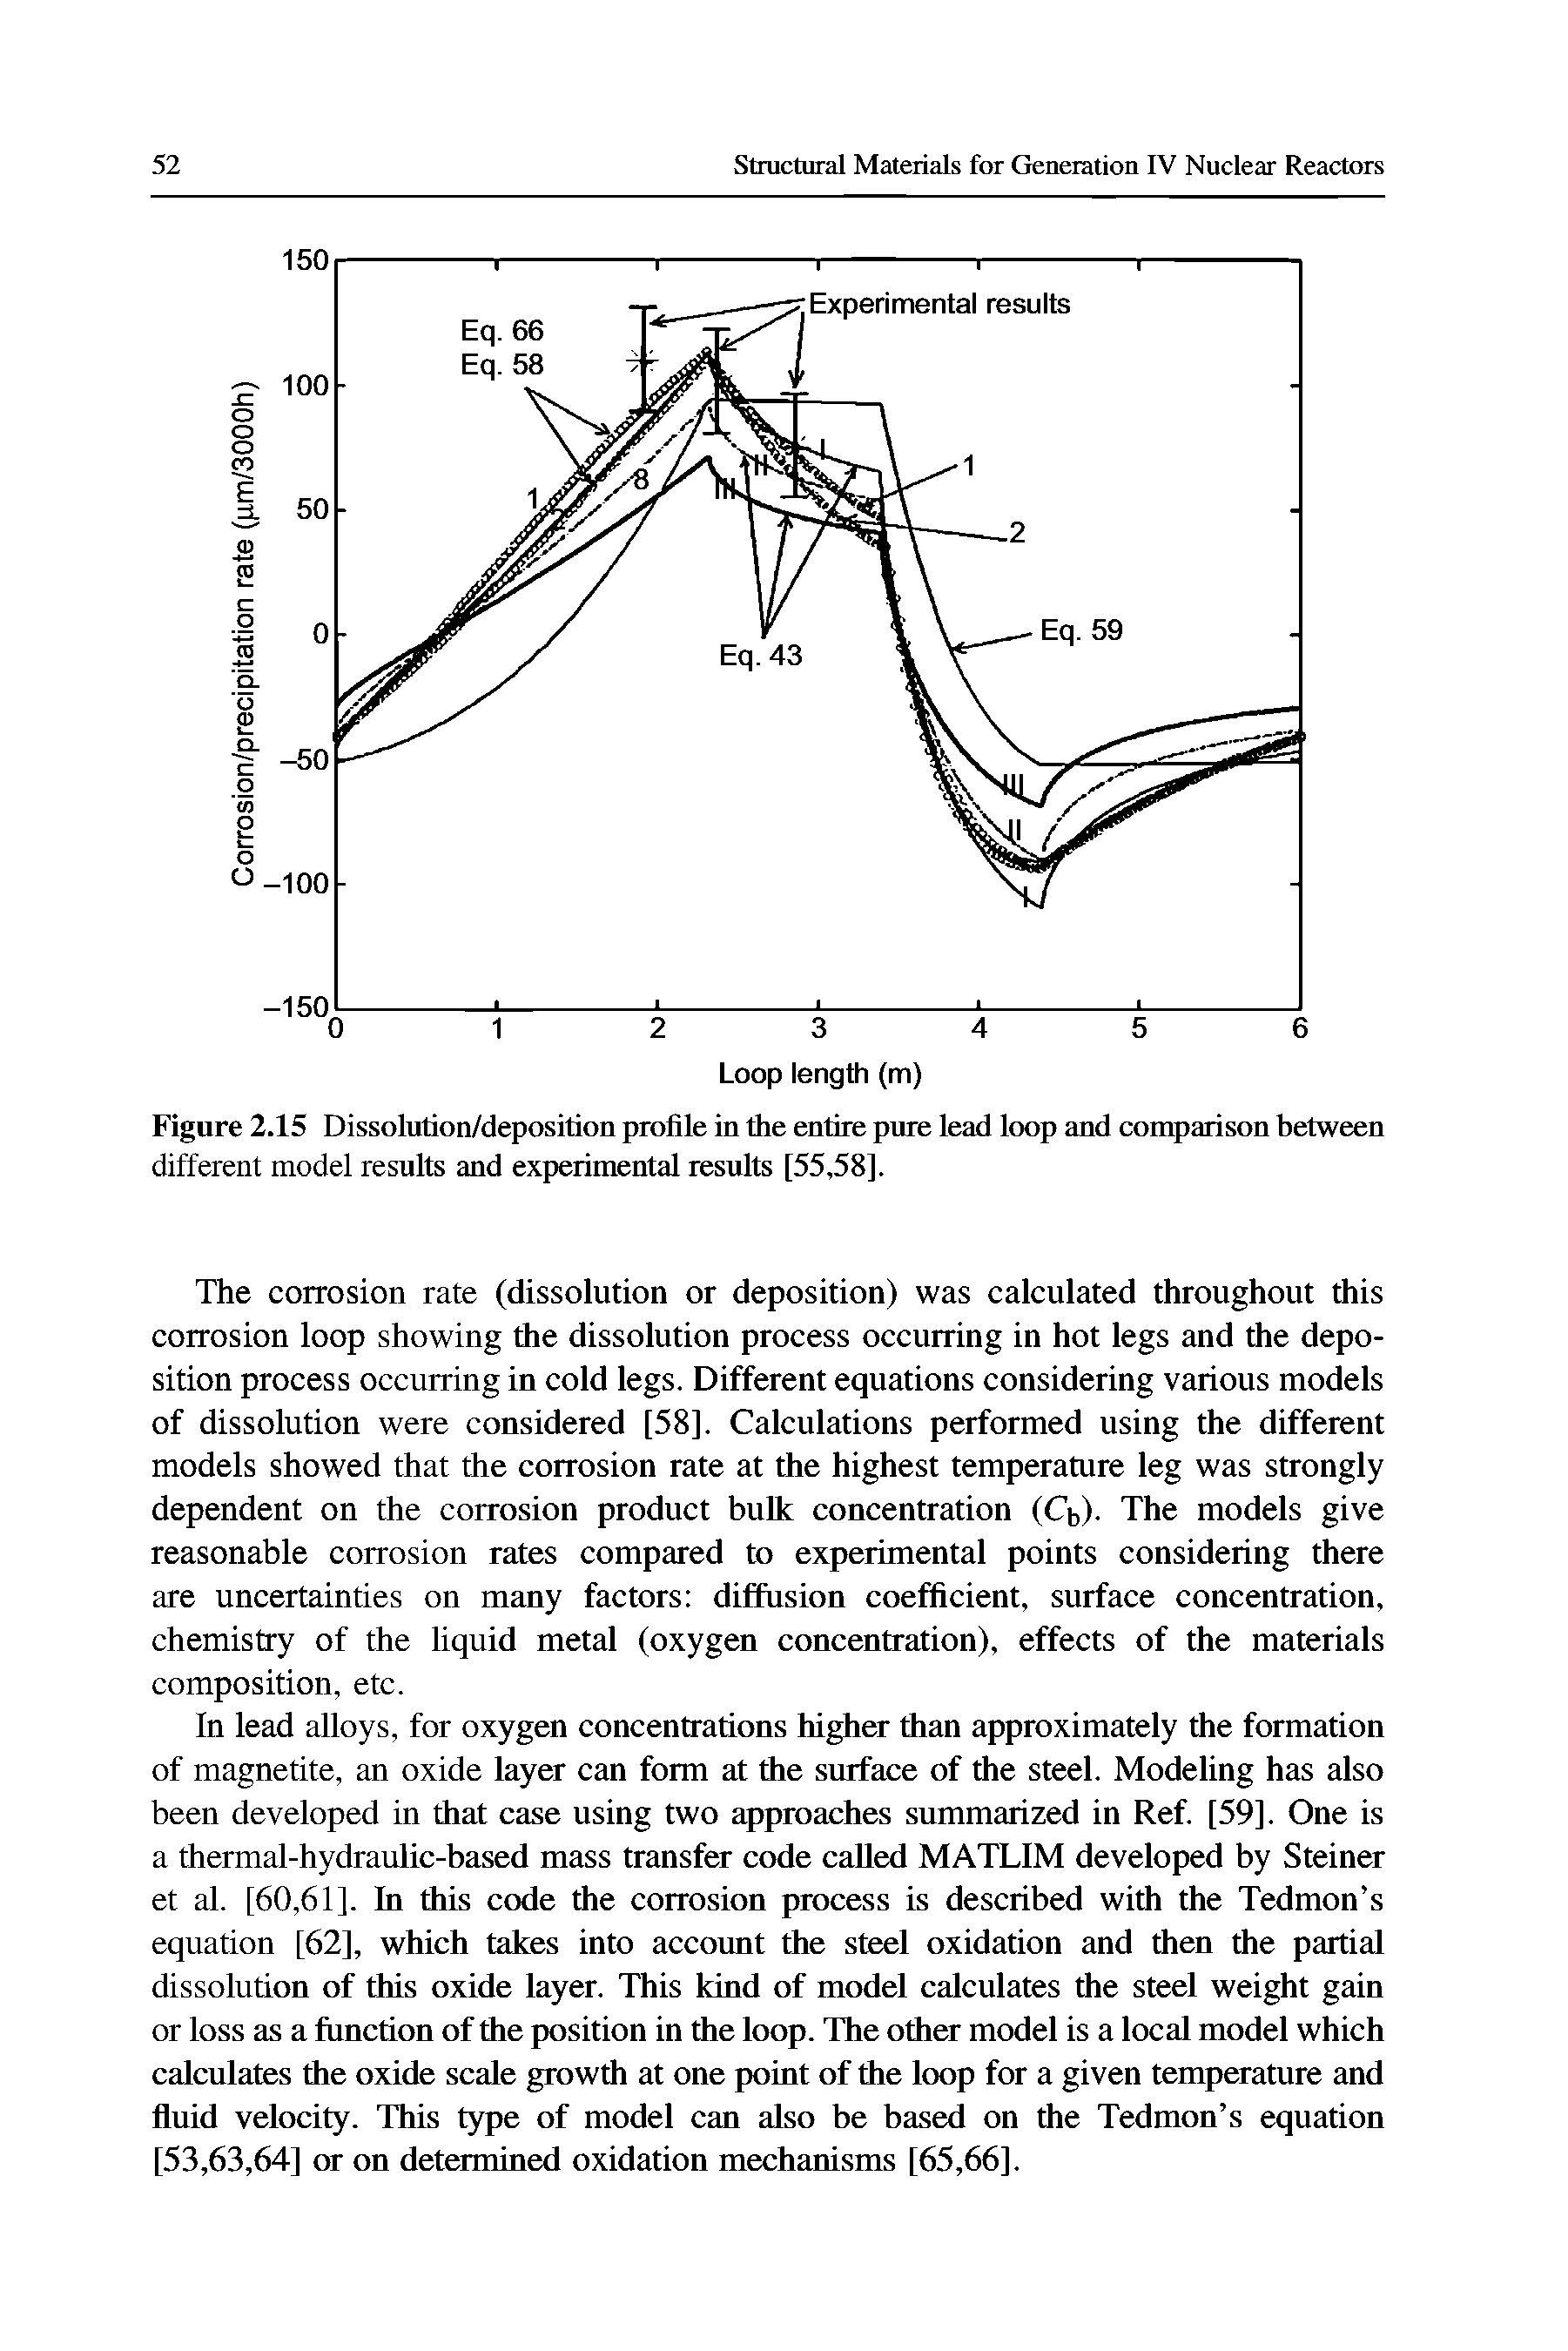 Figure 2.15 Dissolution/deposition profile in the entire pure iead ioop and comparison between different model results and experimental results [55,58].